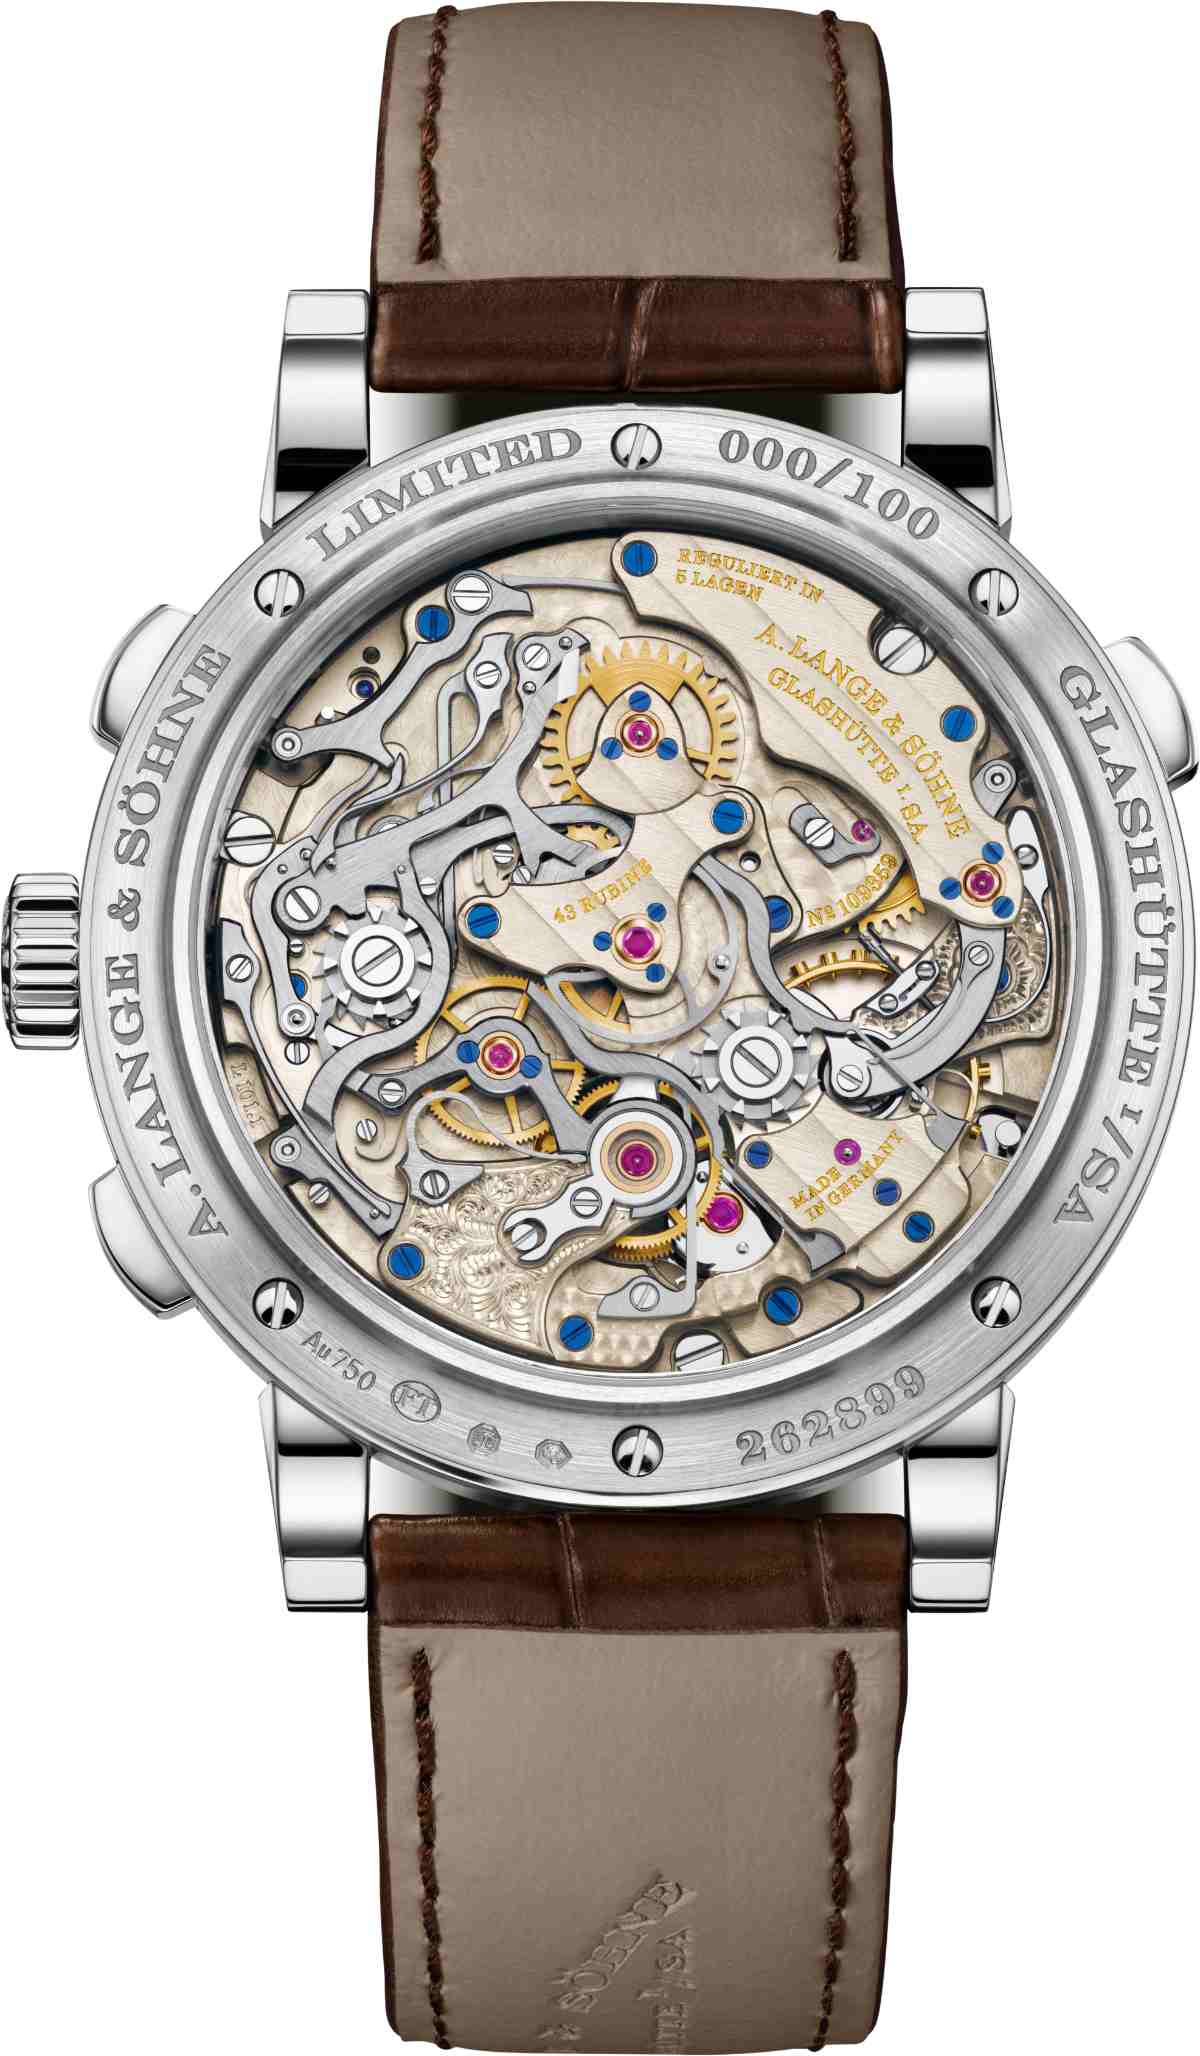 A. Lange & Söhne Presents Its New 1815 Rattrapante Perpetual Calendar Watch